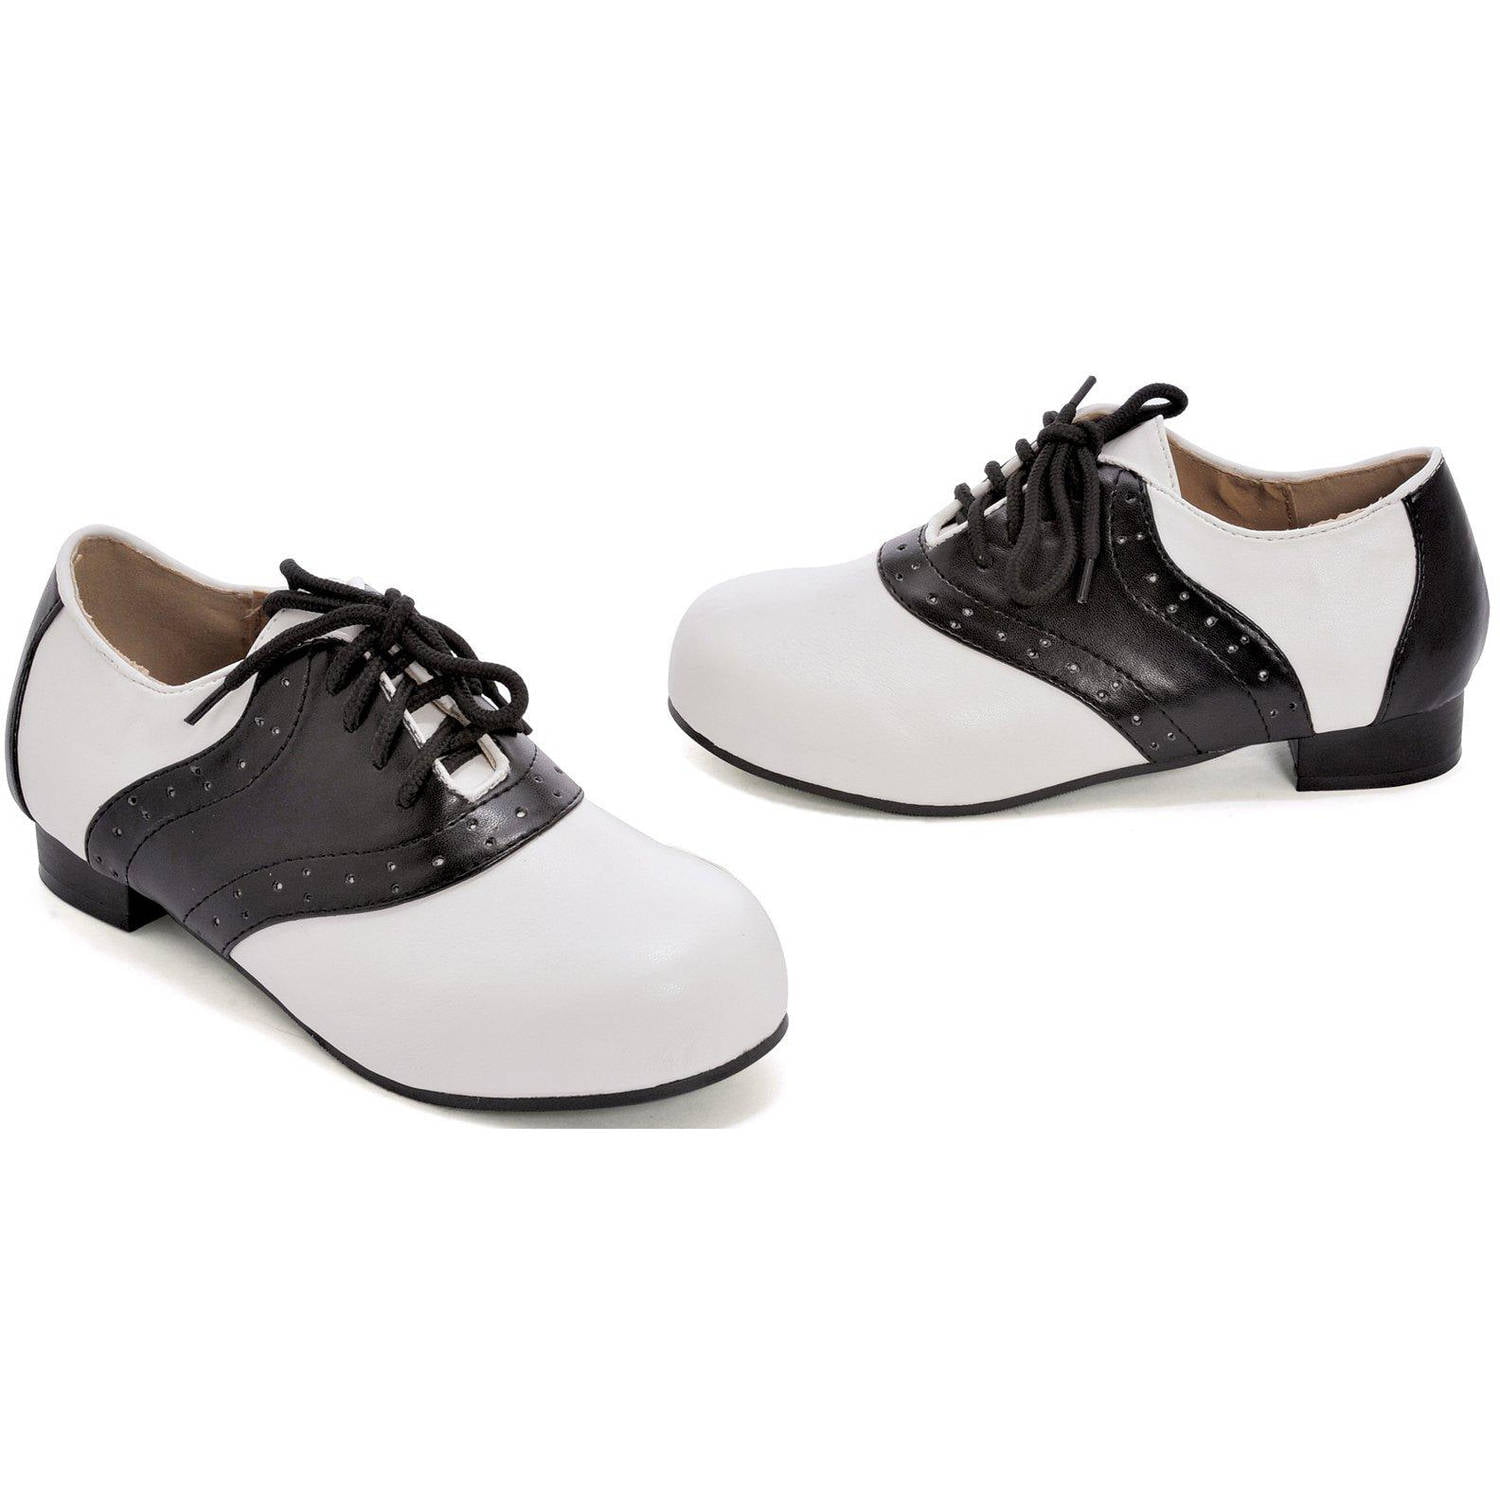 Saddle Black/White Shoes Women's Adult Halloween Costume Accessory ...